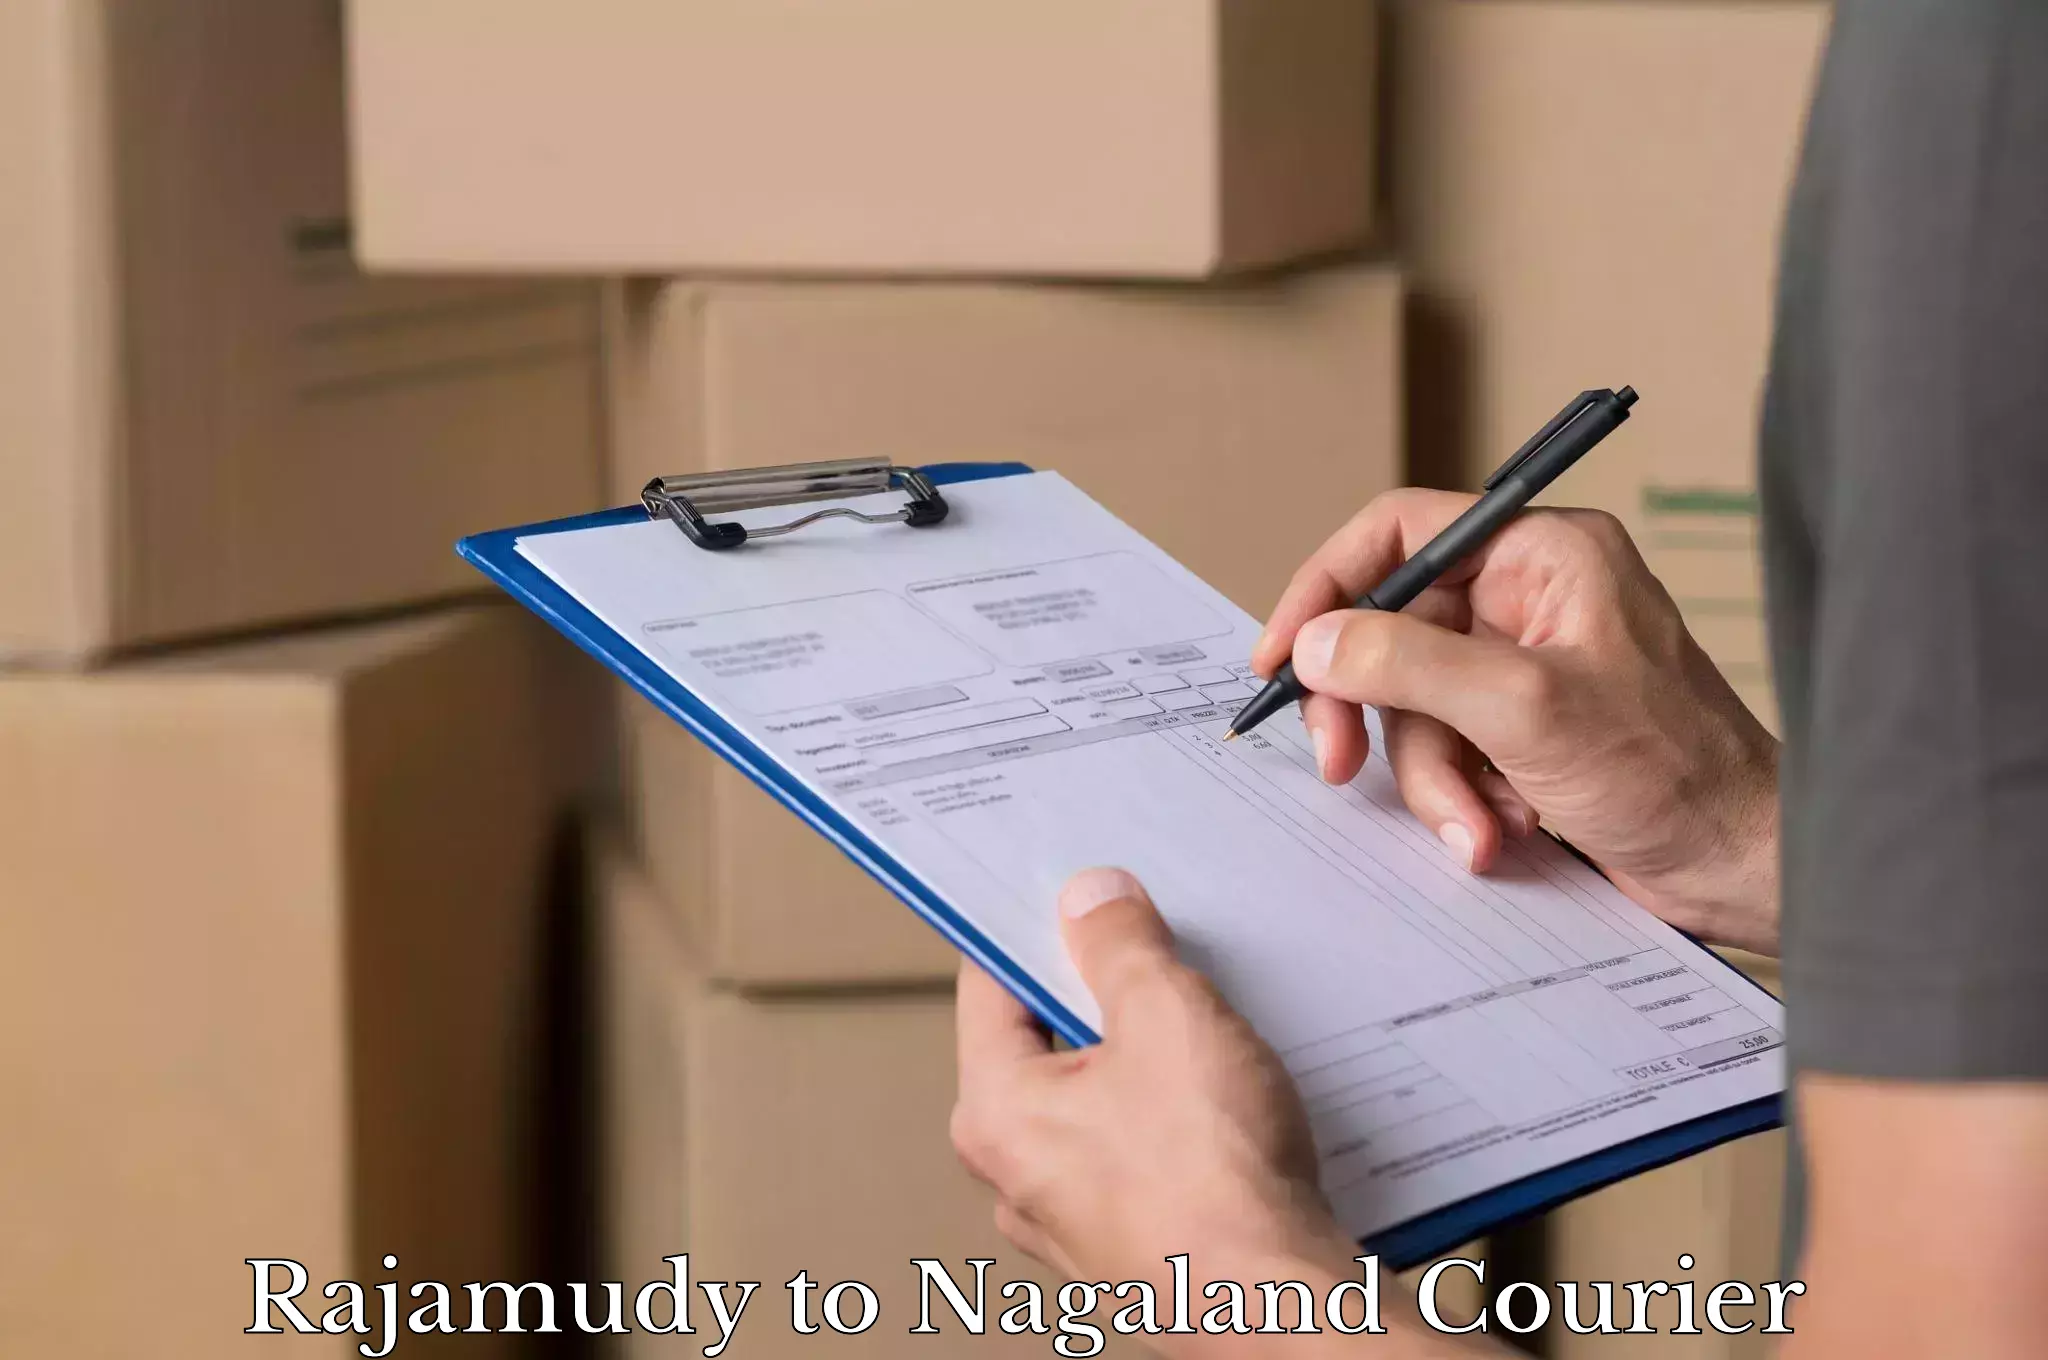 Luggage transport consulting Rajamudy to Nagaland